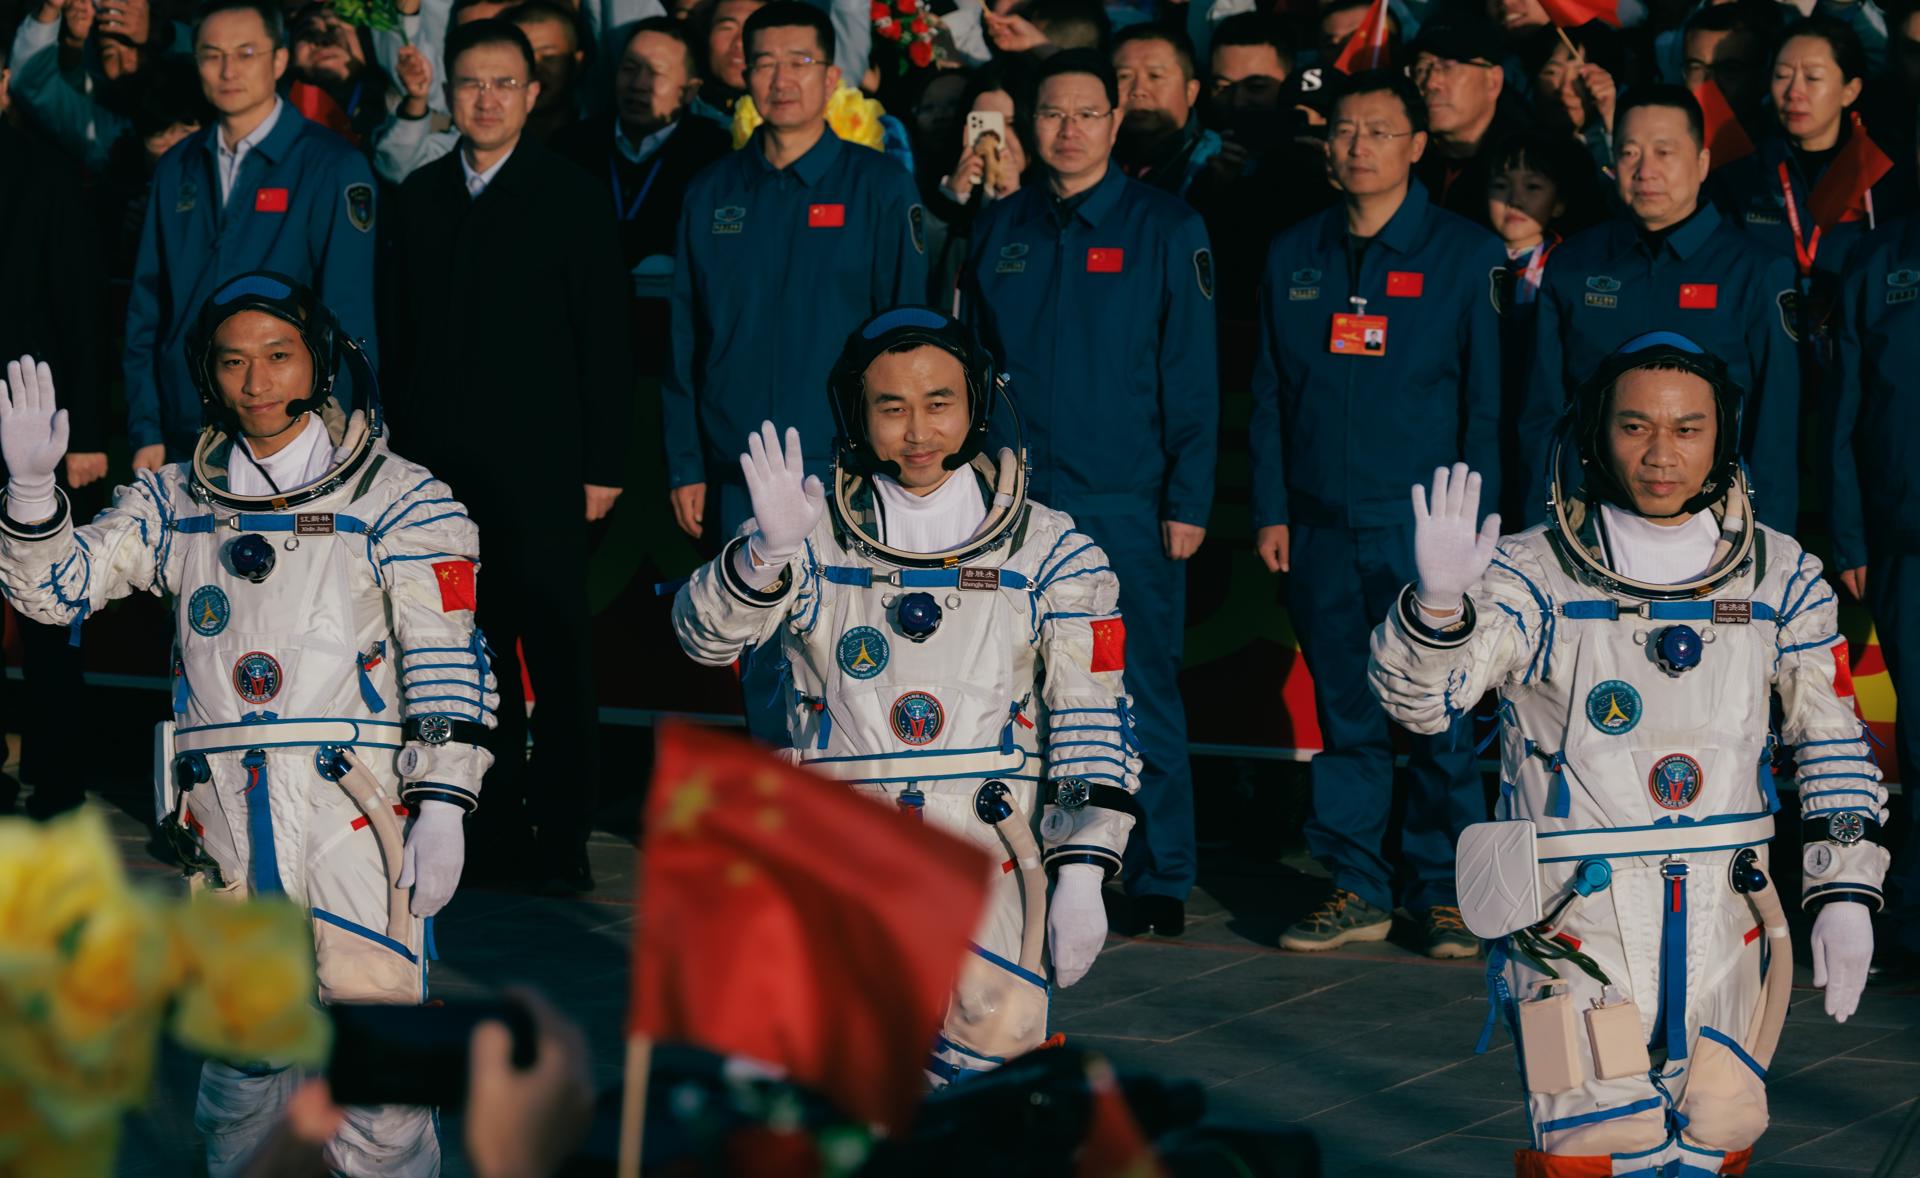 A Shenzhou-17 manned spaceflight mission astronauts commander Tang Hongbo (R), Tang Shengjie (C), and Jiang Xinlin (L) wave during the see-off ceremony before the launch in Jiuquan, Gansu province, China, 26 October 2023. EFE-EPA/ALEX PLAVEVSKI
